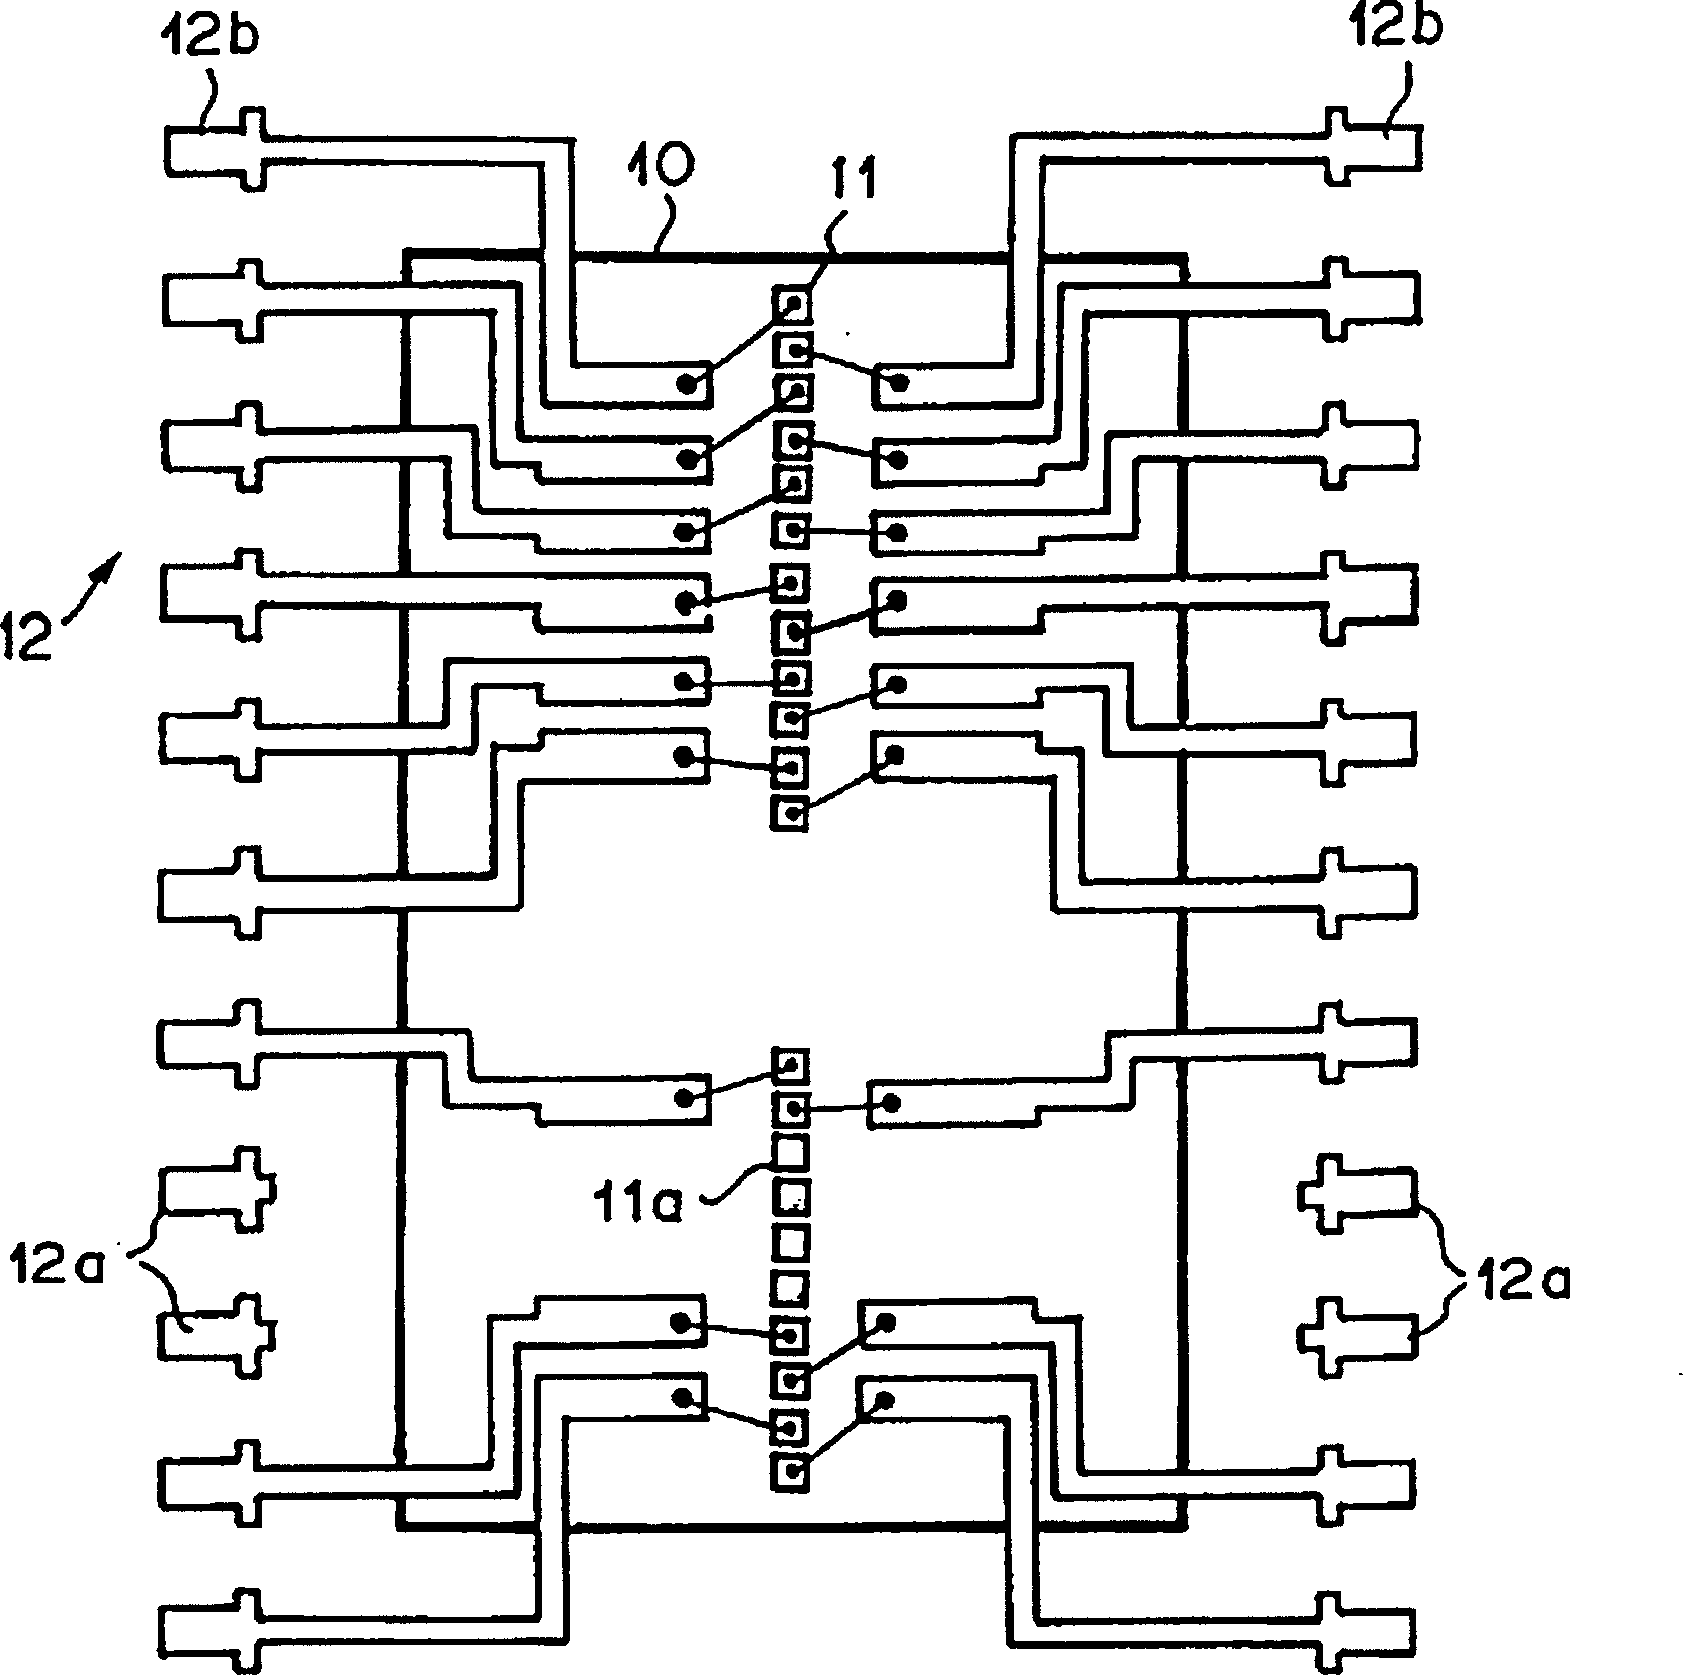 Semiconductor device with protection circuit